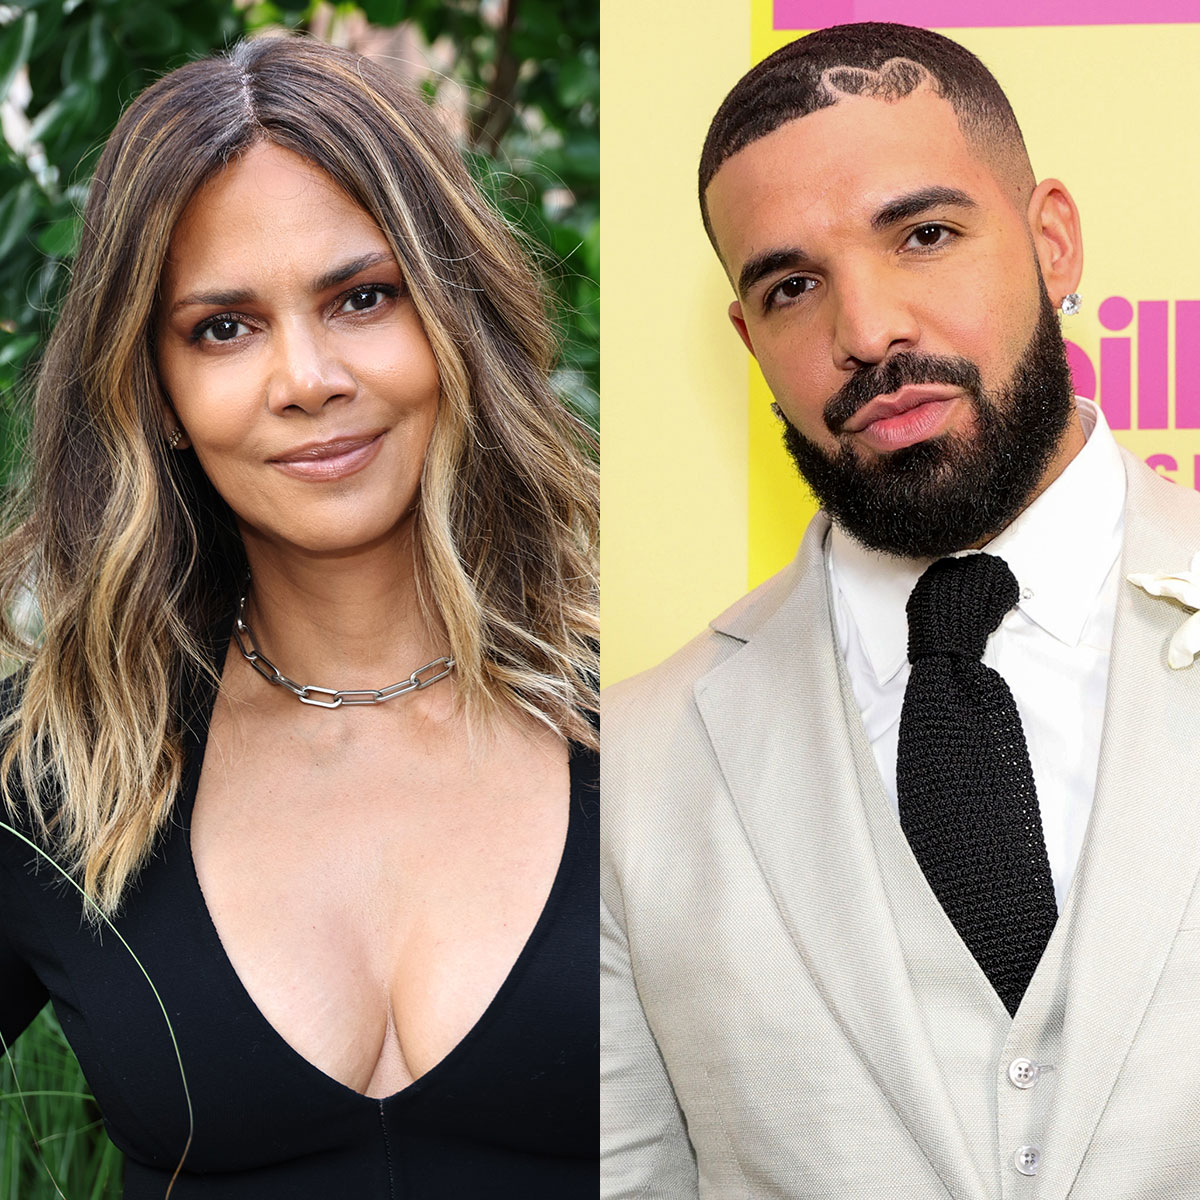 Halle Berry Says Drake Used Slime Photo Without Her Permission